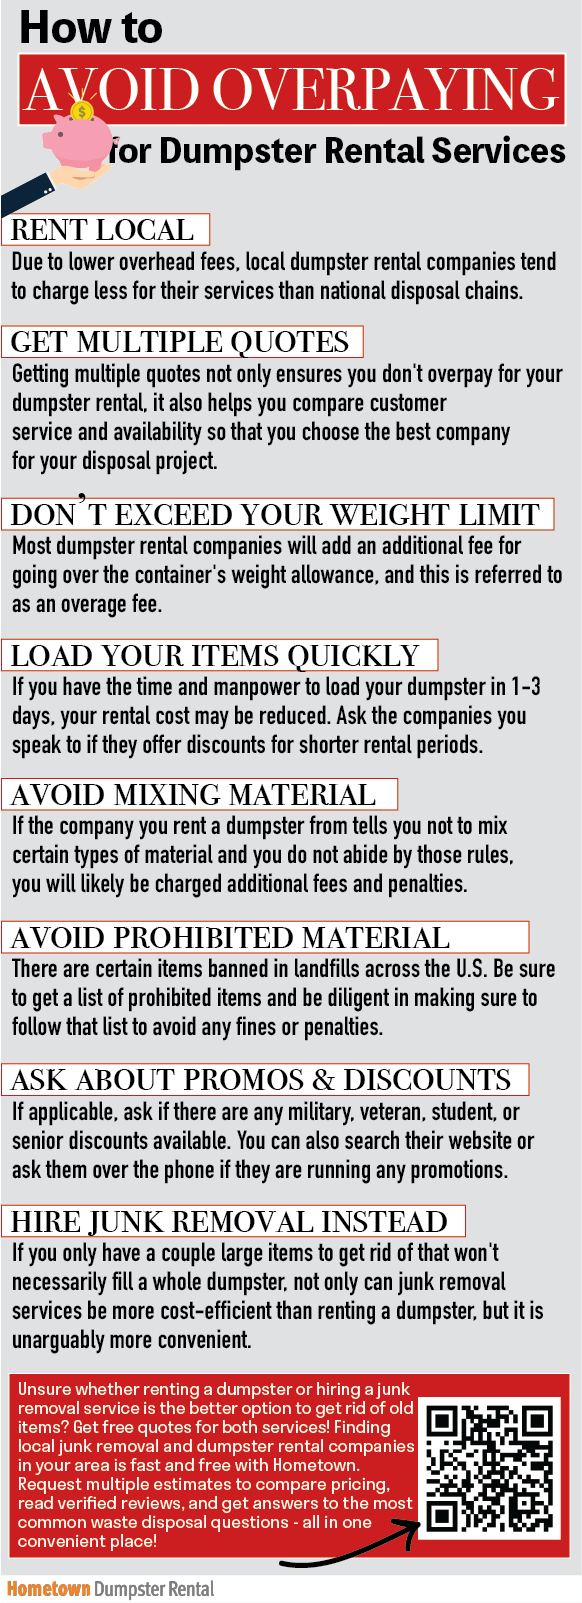 How to Avoid Overpaying for Dumpster Rental Services Infographic